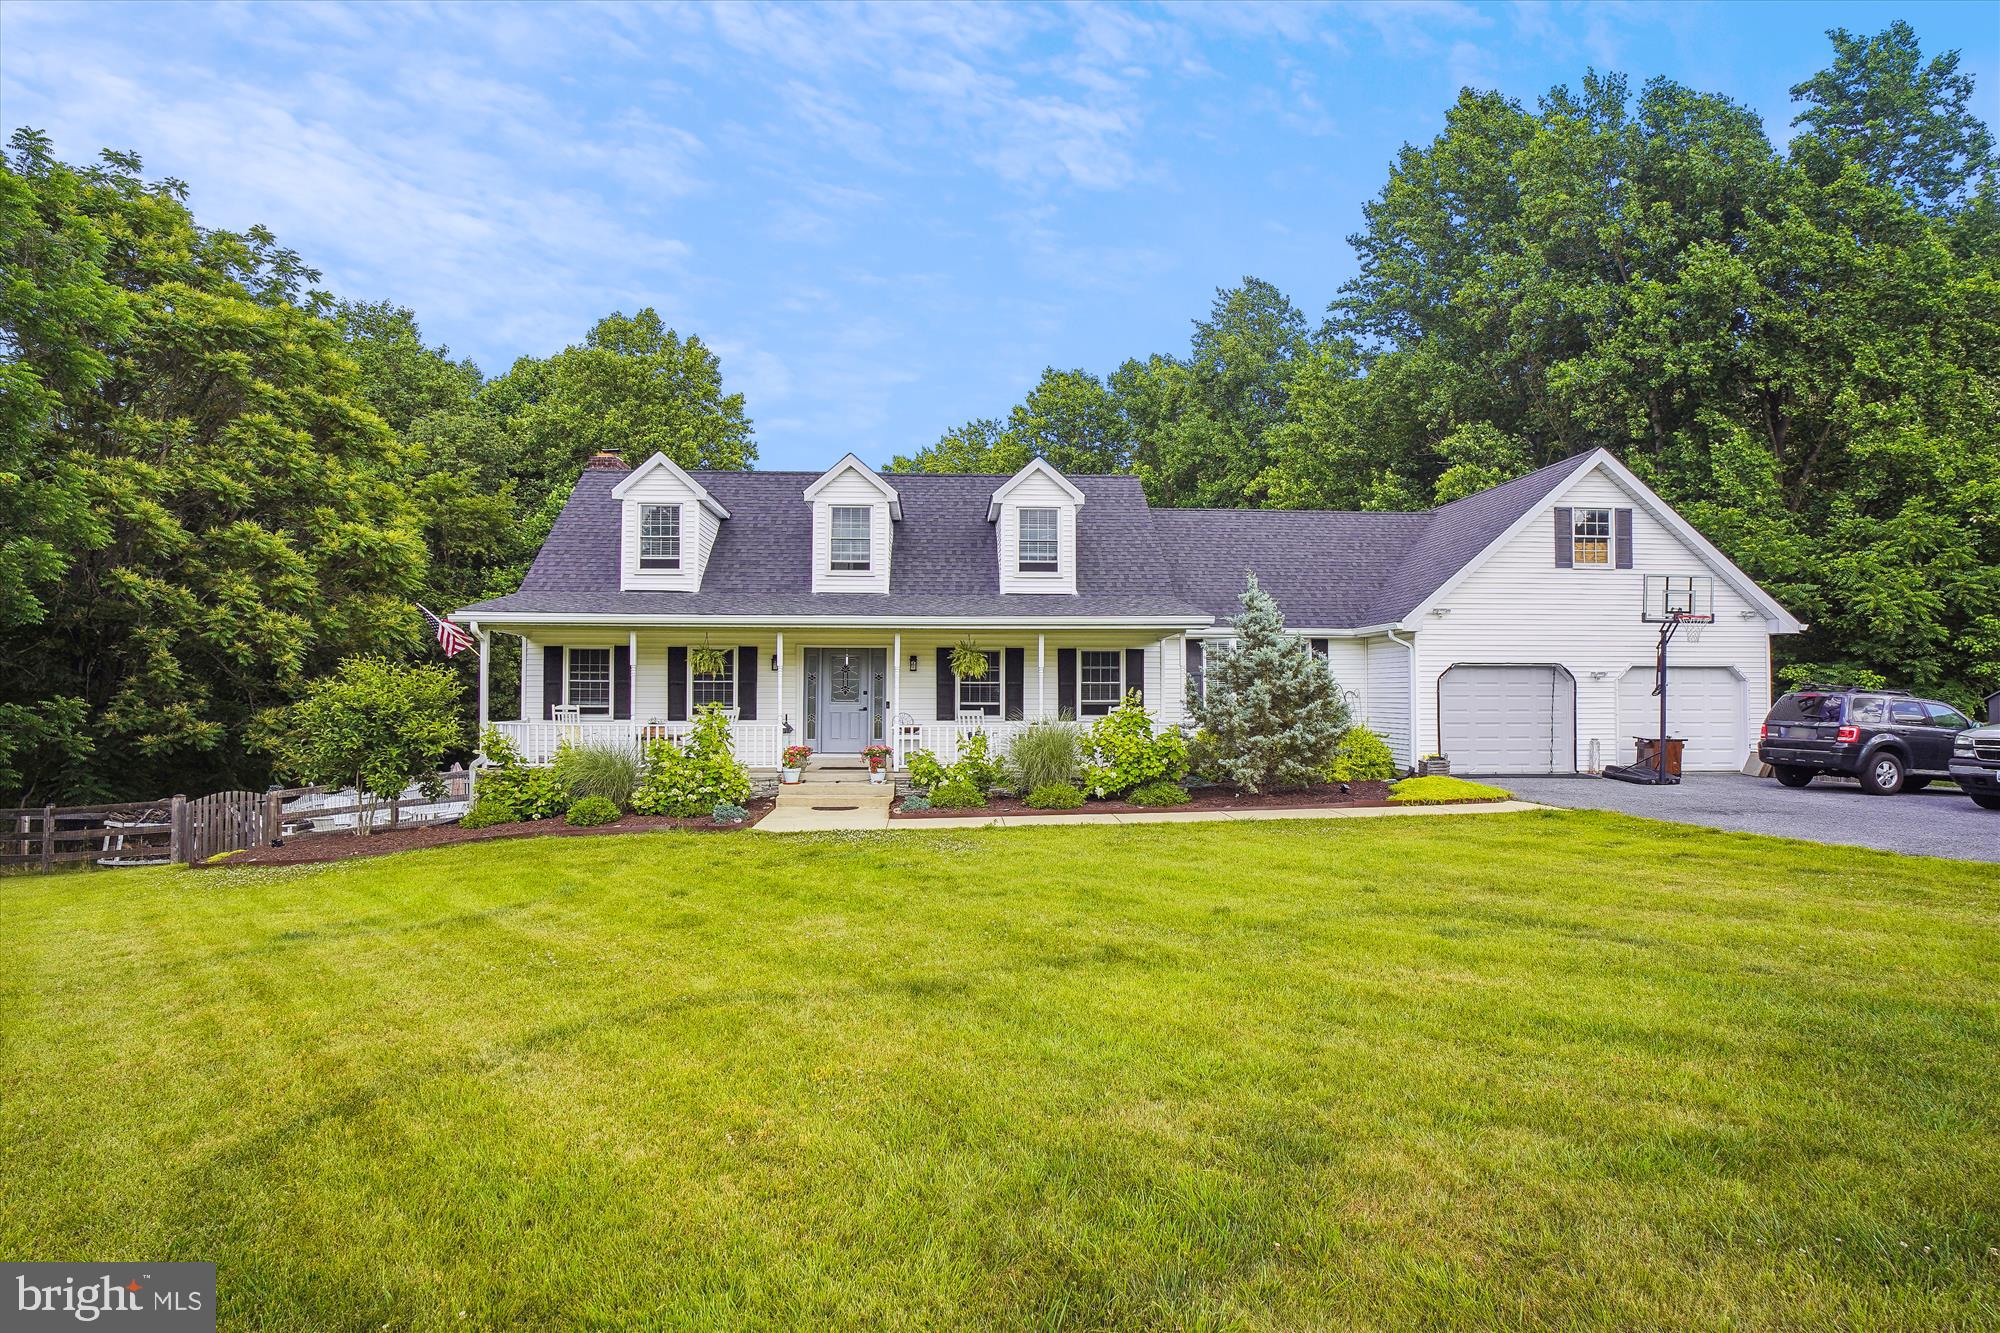 This beautiful, well-cared-for home sits on a 2.7-acre lot at a Cul-de-Sac in the Ridgeway Farms nei